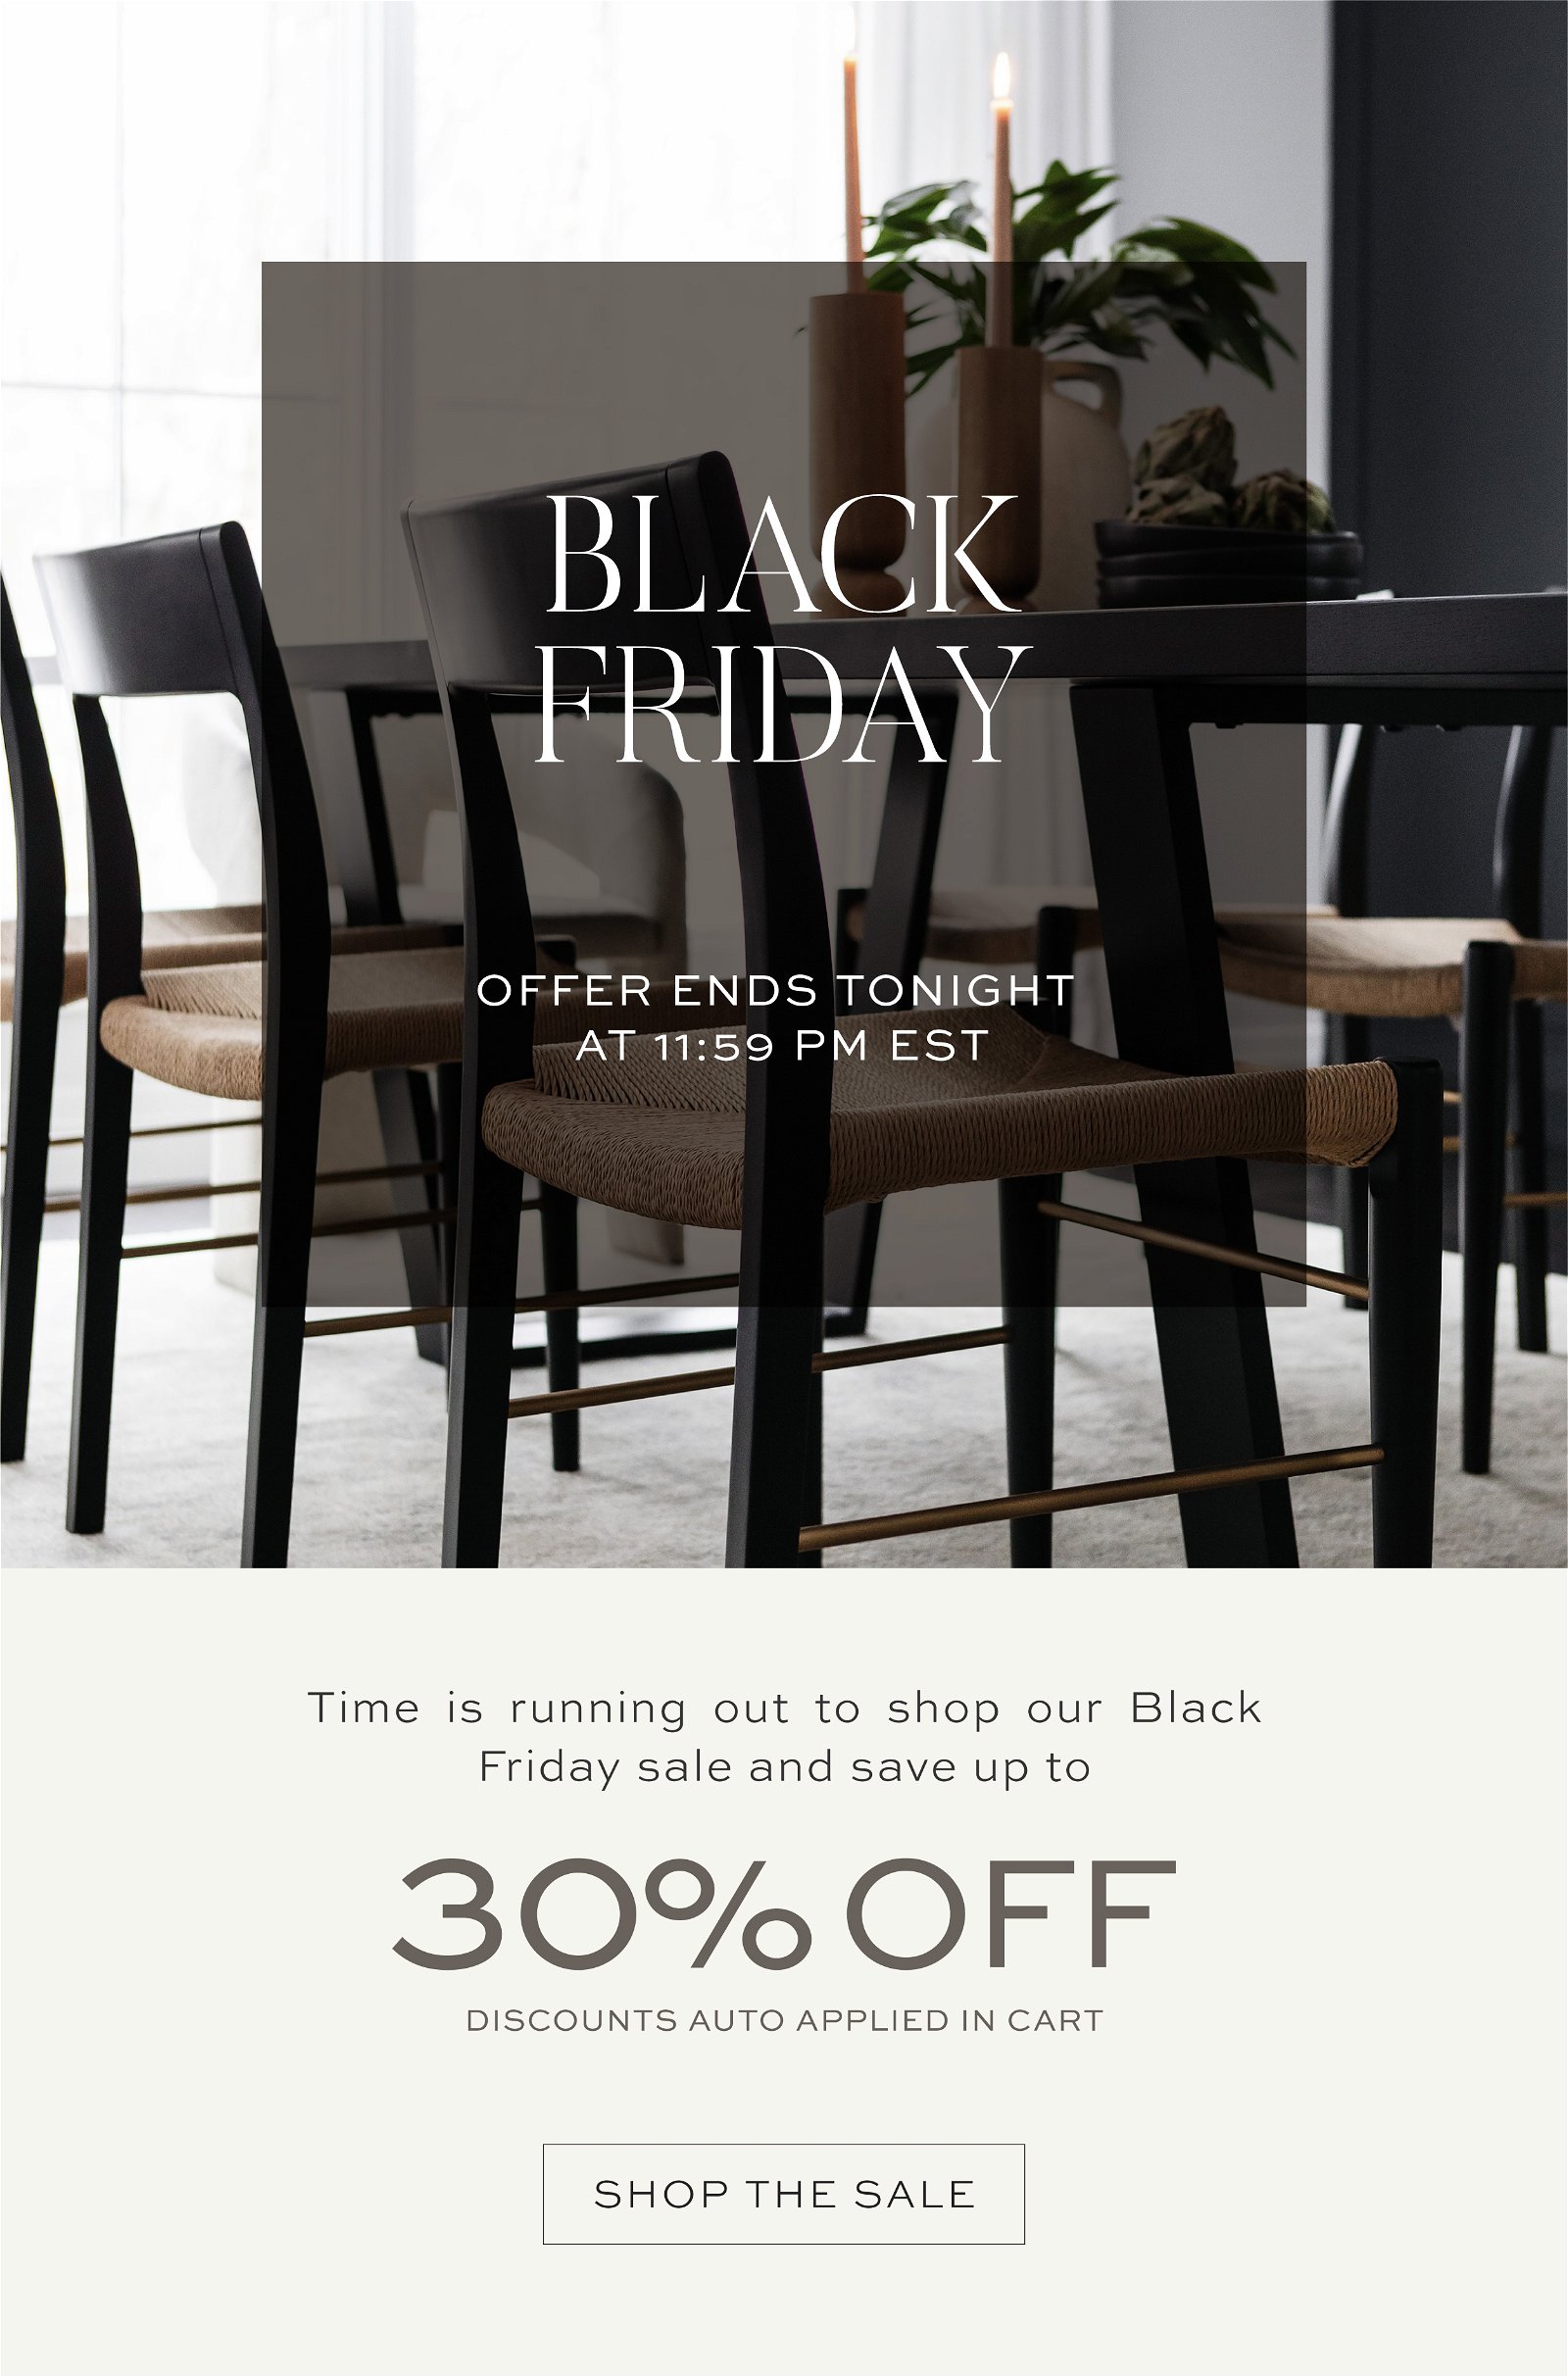 Black Friday // 48 hours left to refresh your home // shop our biggest sale of the year and save up to 30% off / discounts auto applied in cart // click to shop the sale